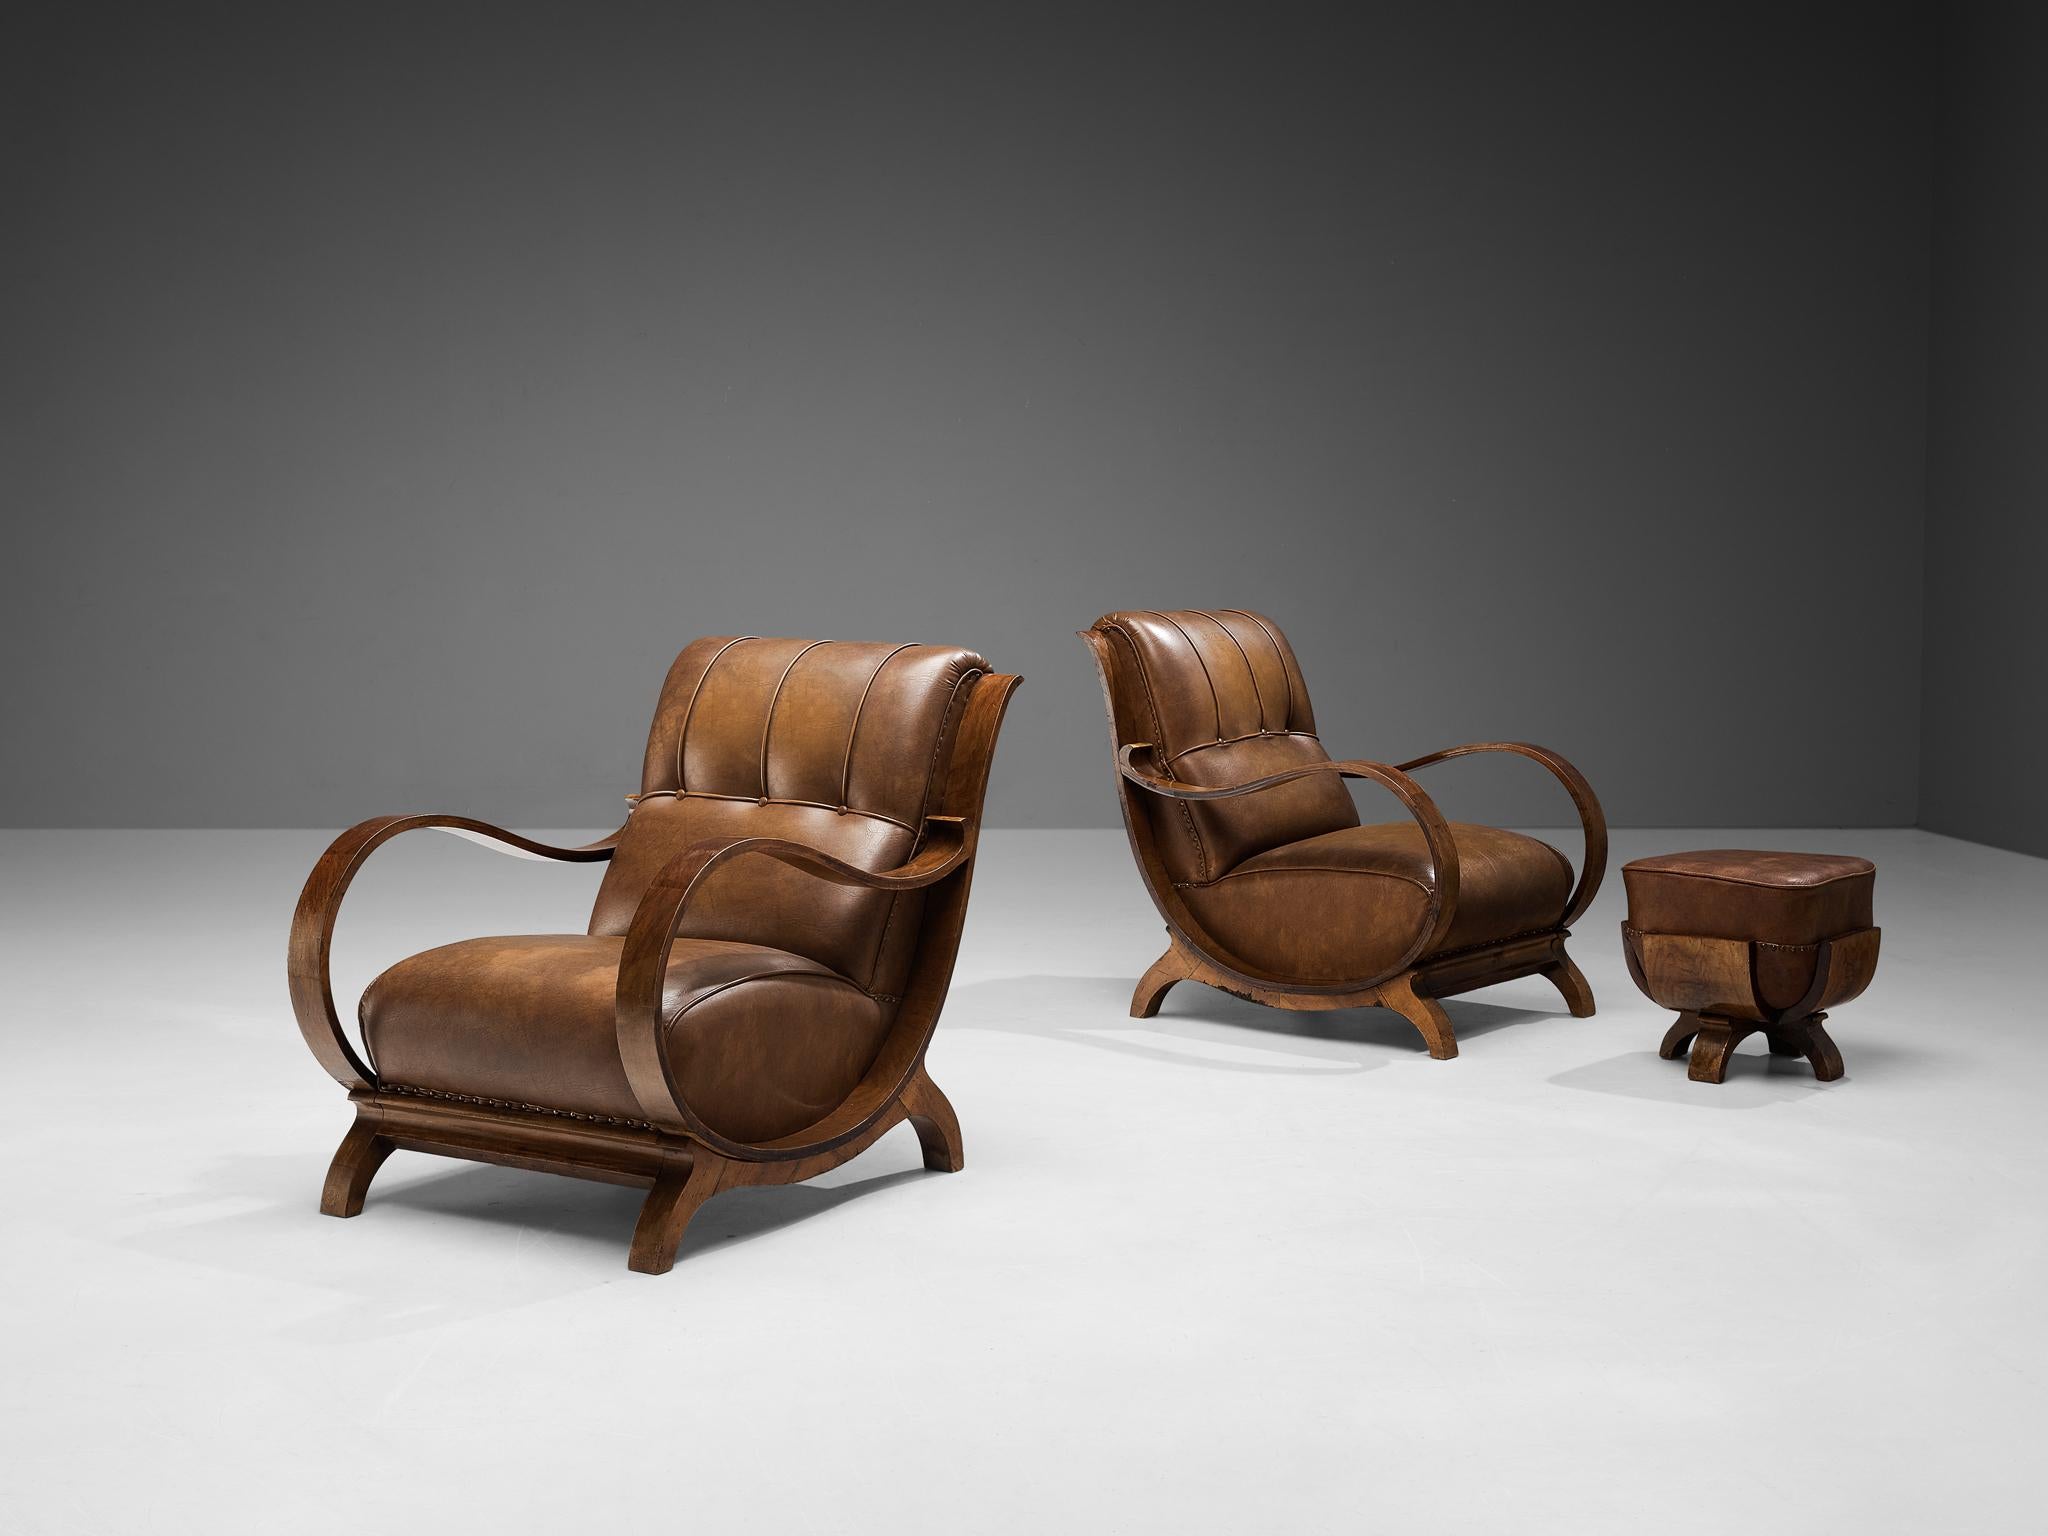 Pair of lounge chairs and ottoman, leather, walnut, metal, Italy, 1930s

Special and attractive pair of Italian lounge chairs and one ottoman. The wood used to form the beautiful curves and lines of this design is walnut. The leather is cognac